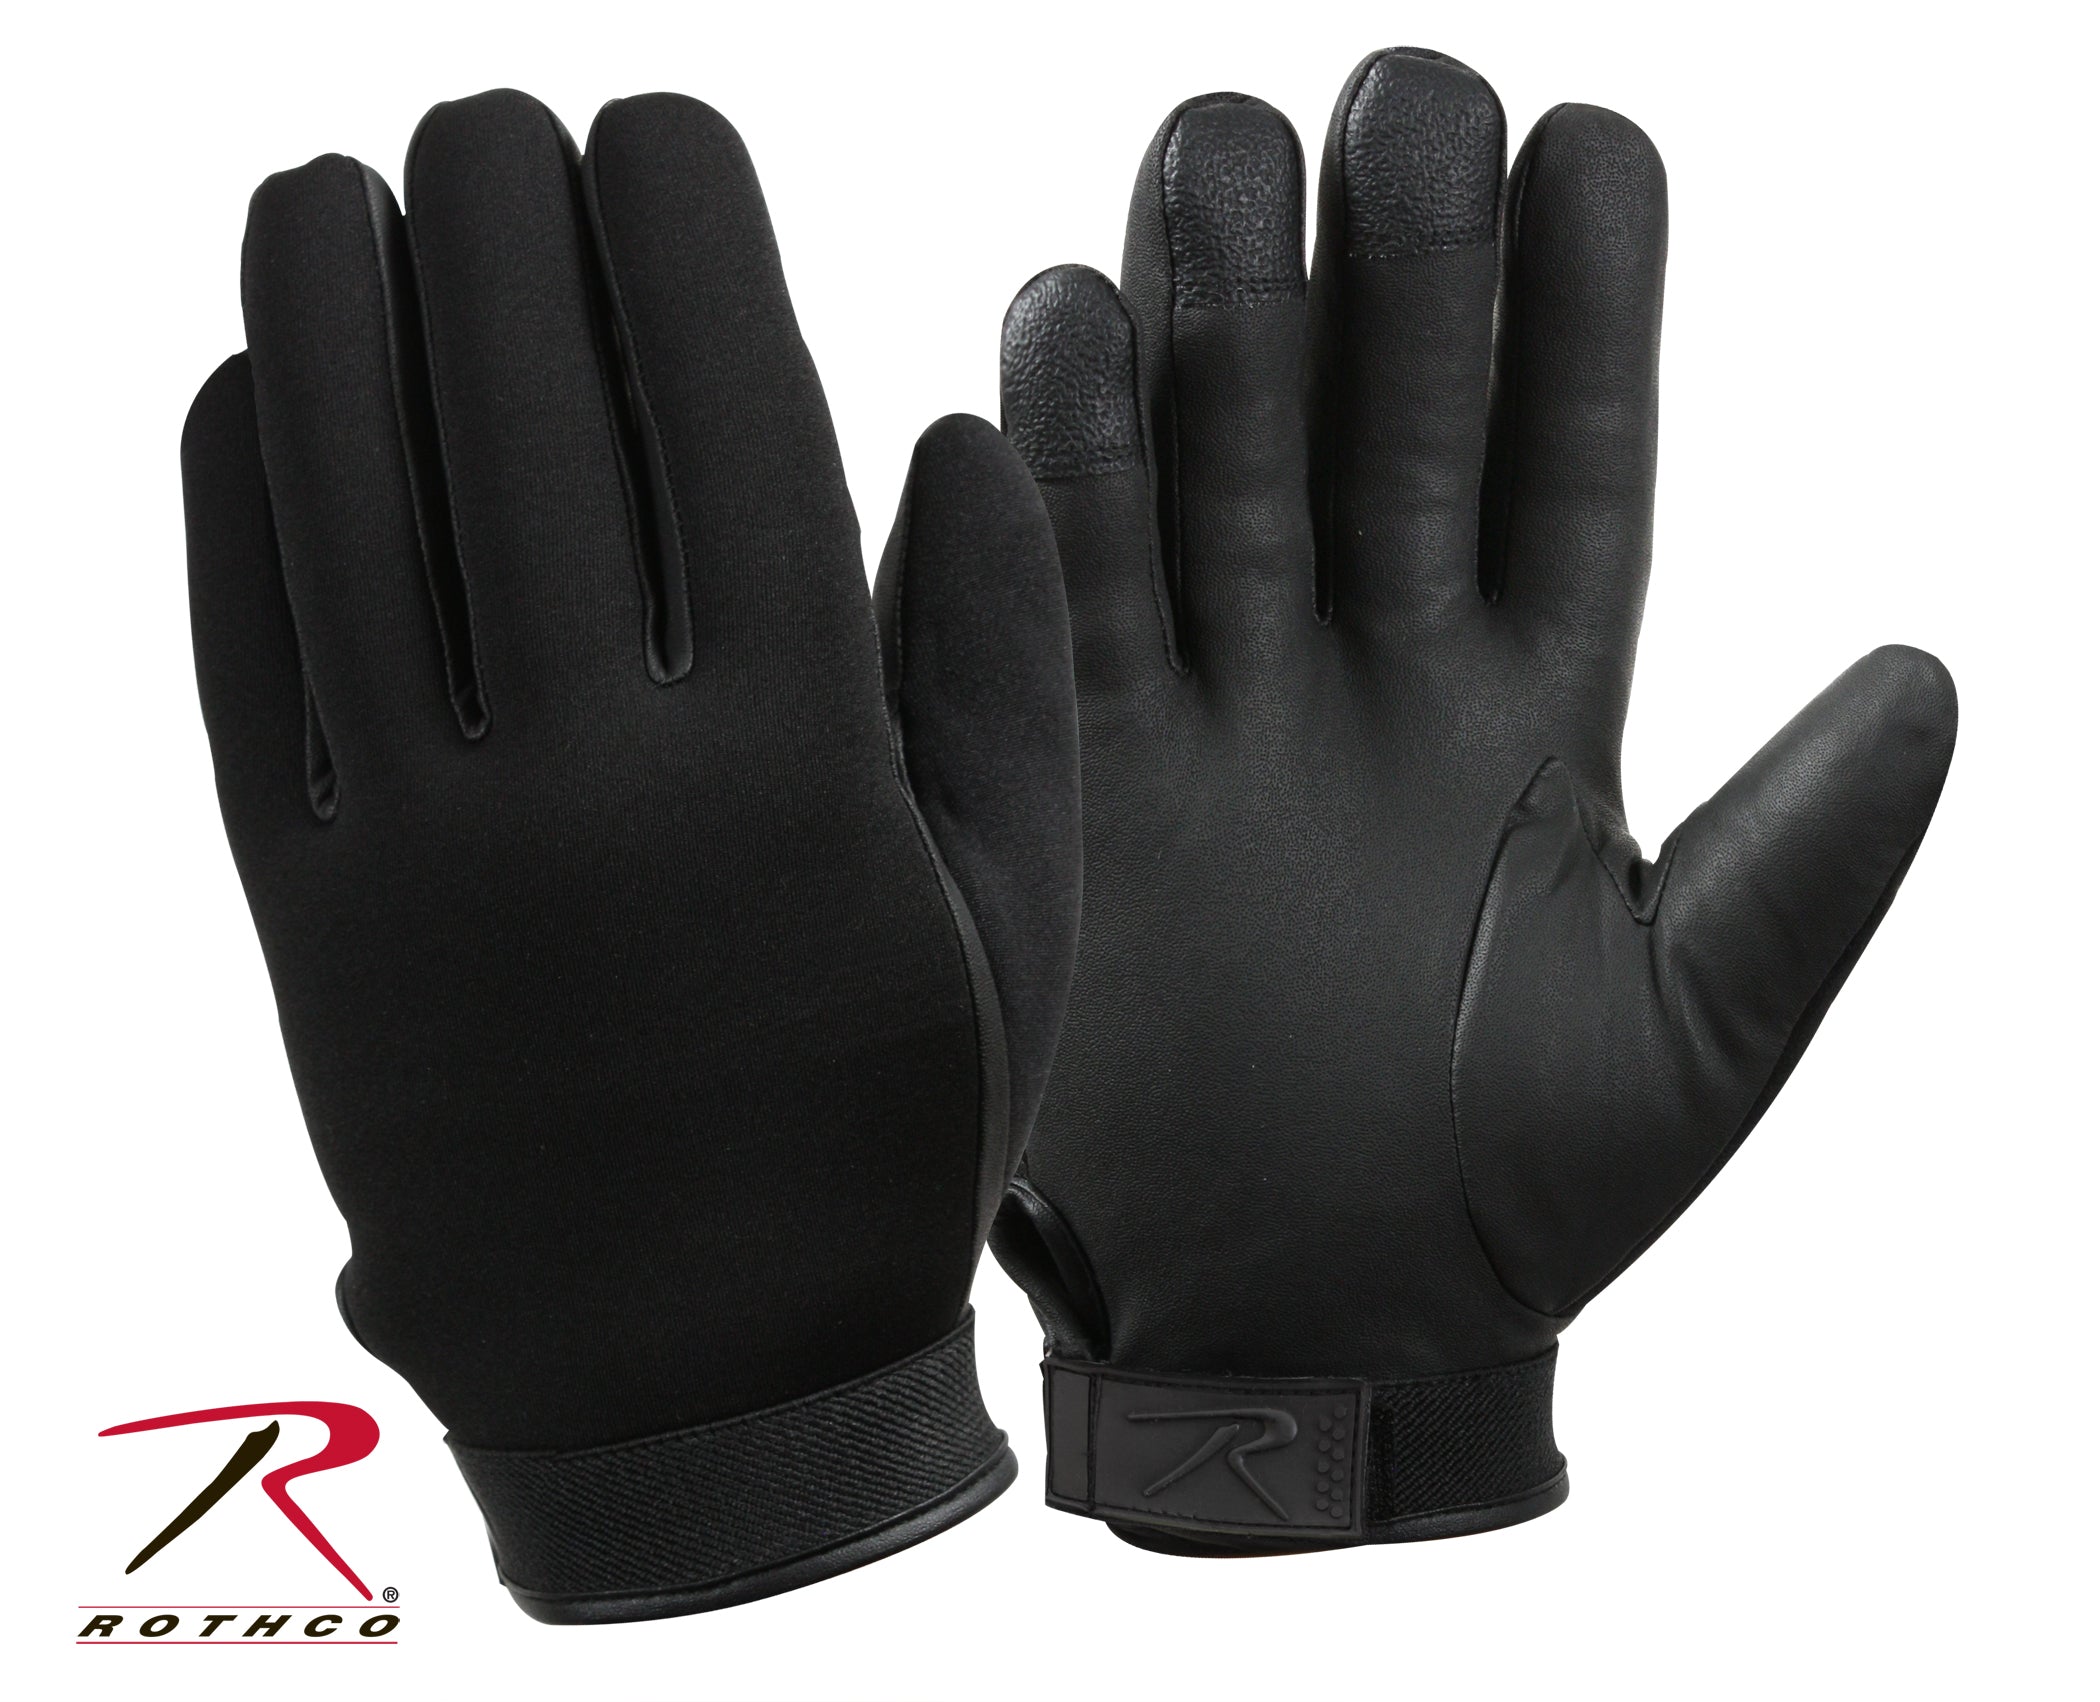 Rothco Cold Weather Neoprene Duty Gloves